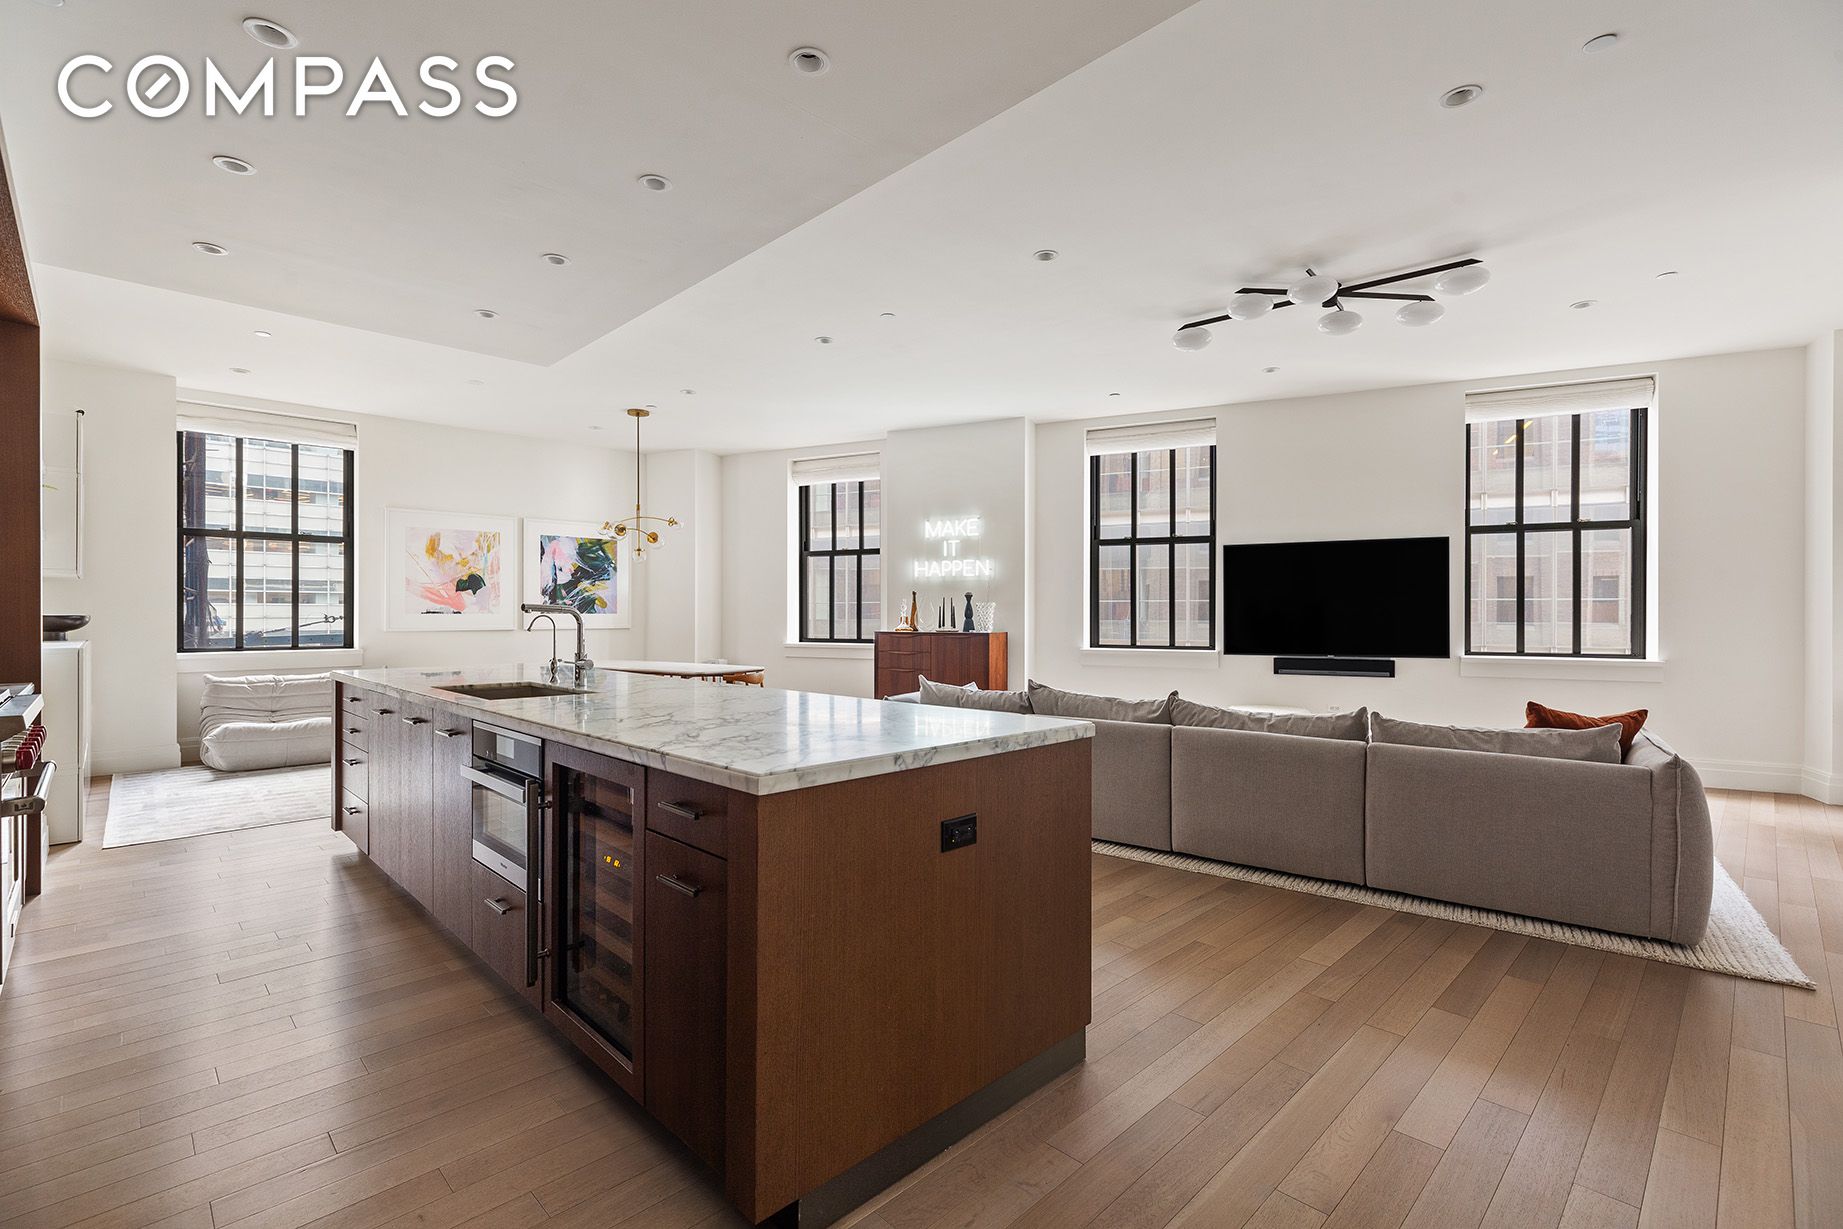 100 Barclay Street 12K, Tribeca, Downtown, NYC - 3 Bedrooms  
3.5 Bathrooms  
6 Rooms - 